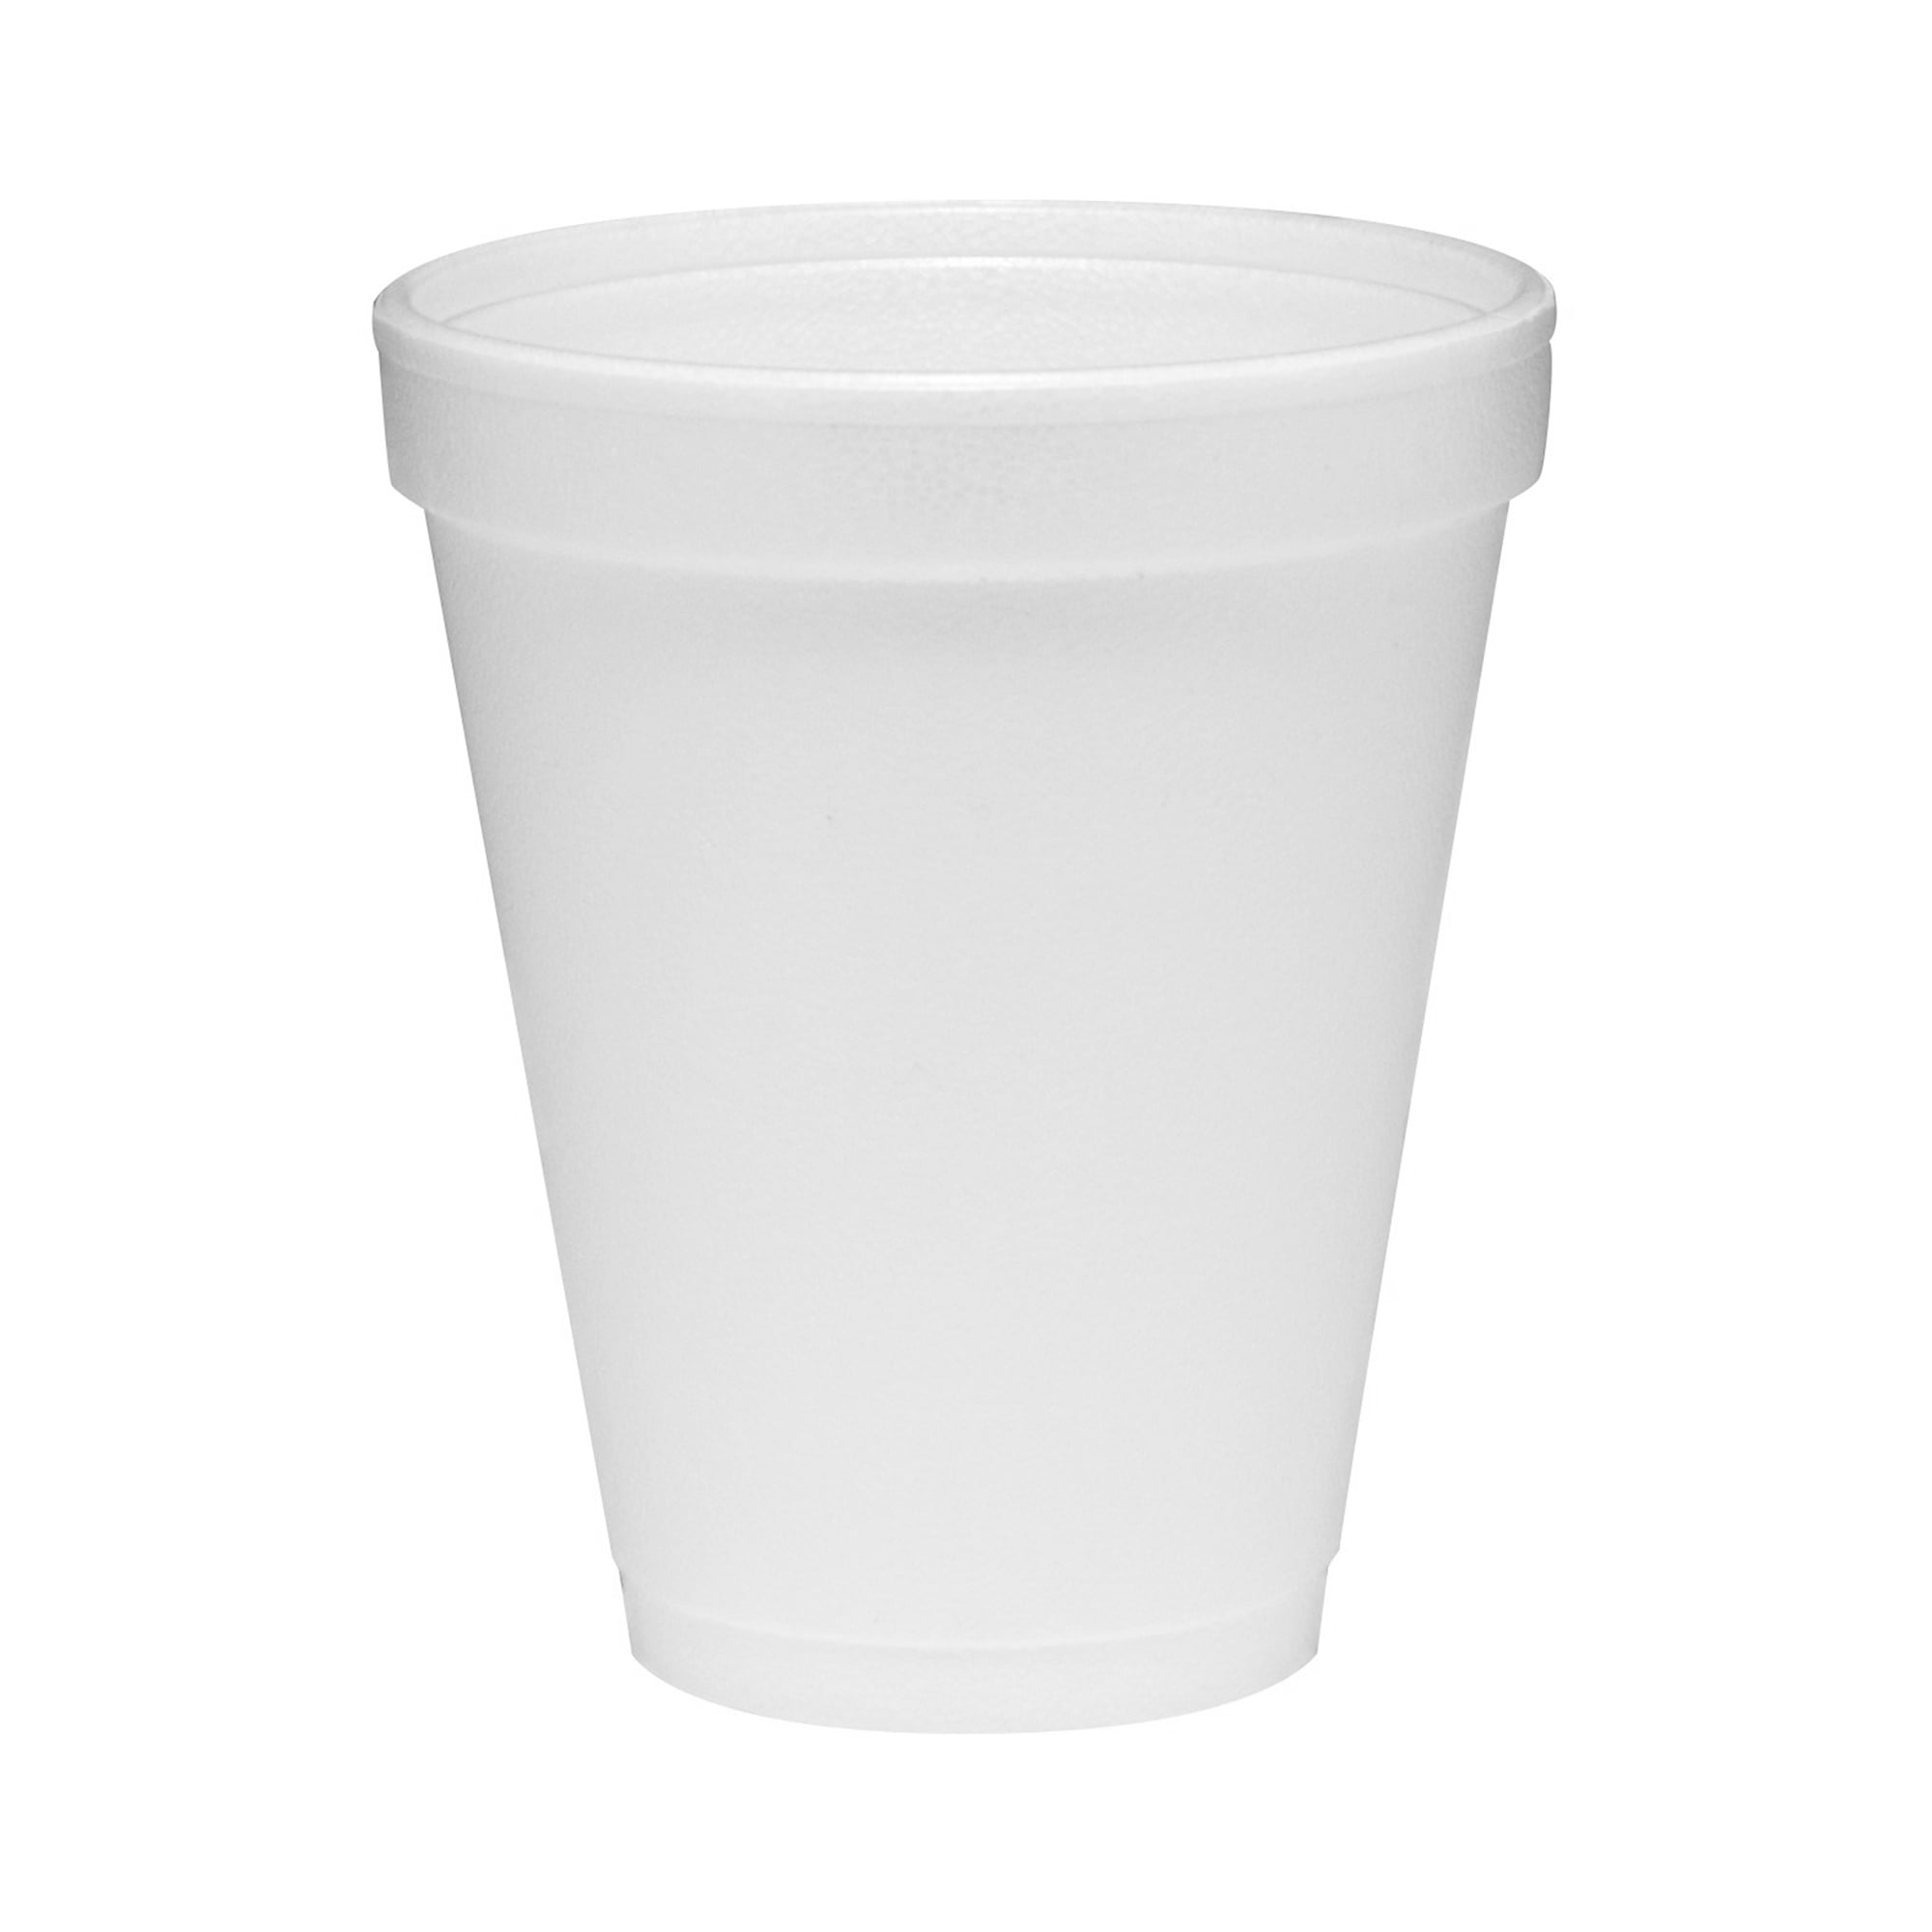 McKesson Drinking Cup 5 oz. Clear Polypropylene Disposable, 2000/CS